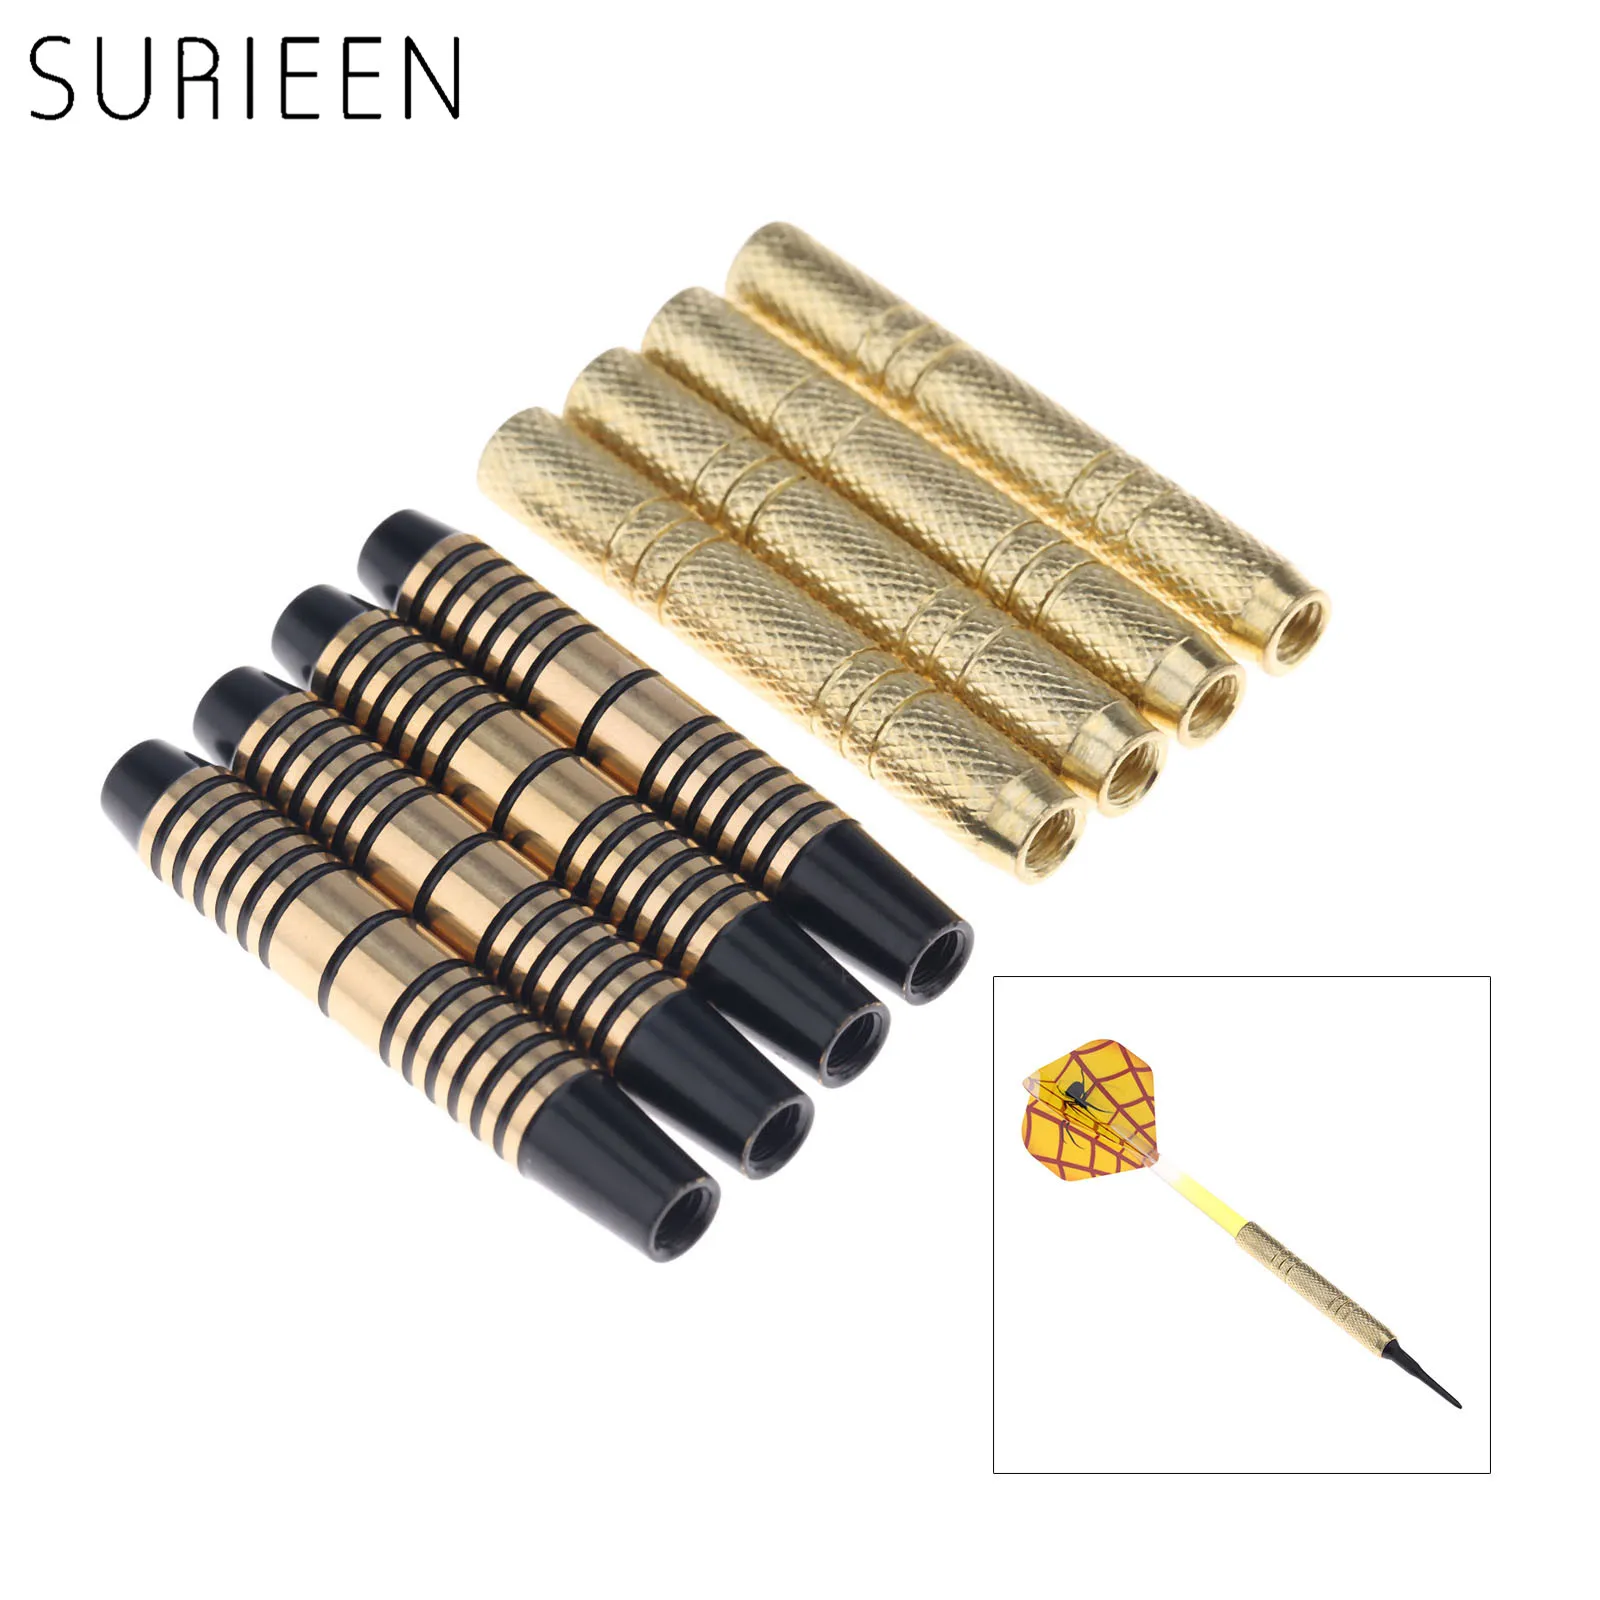 SURIEEN 4 pieces Professional Copper Dart Barrel for Nylon/Steel darts tip Dart Accessories 47mm-12g / 49mm-16g with 2BA Thread bubble series 47mm floating tourbillon mechanical watch with fashionable and waterproof limited edition